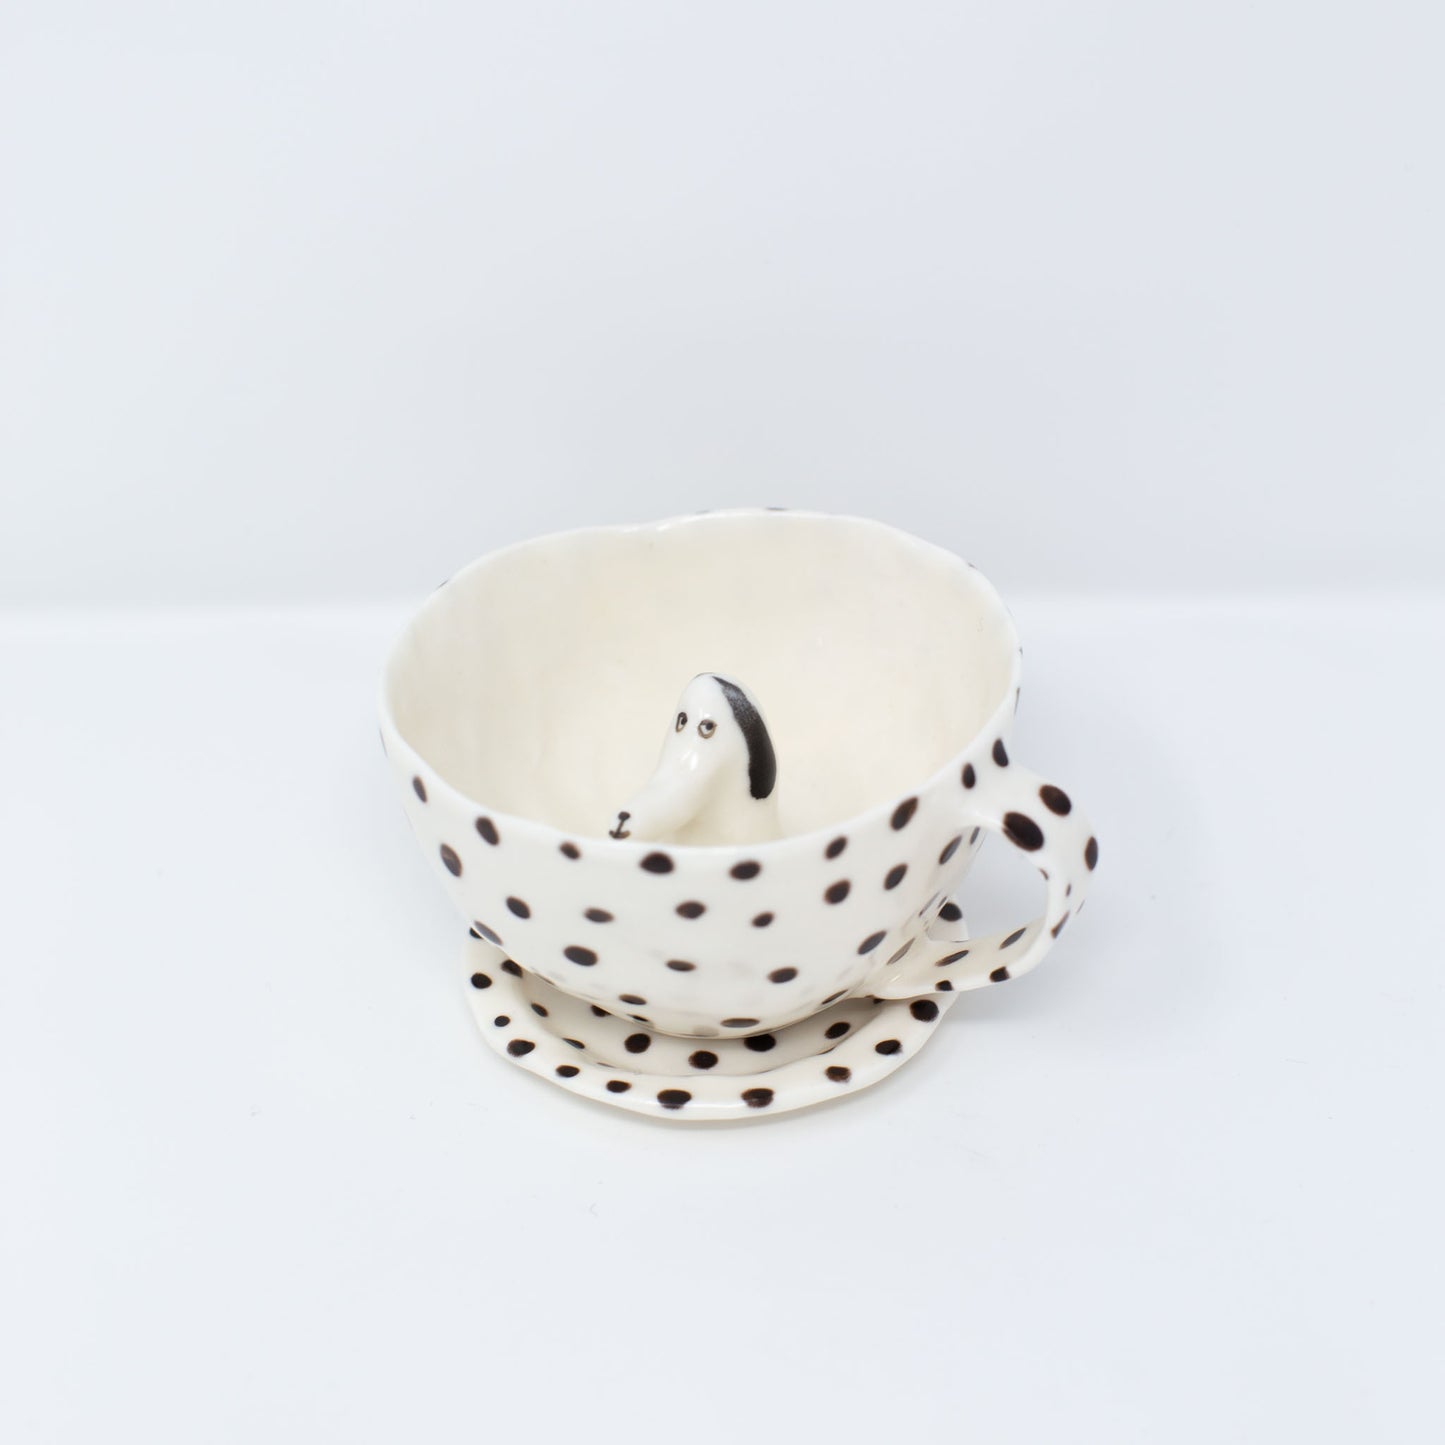 Black Polka Dot Dog Cup with Saucer by Eleonor Bostrom